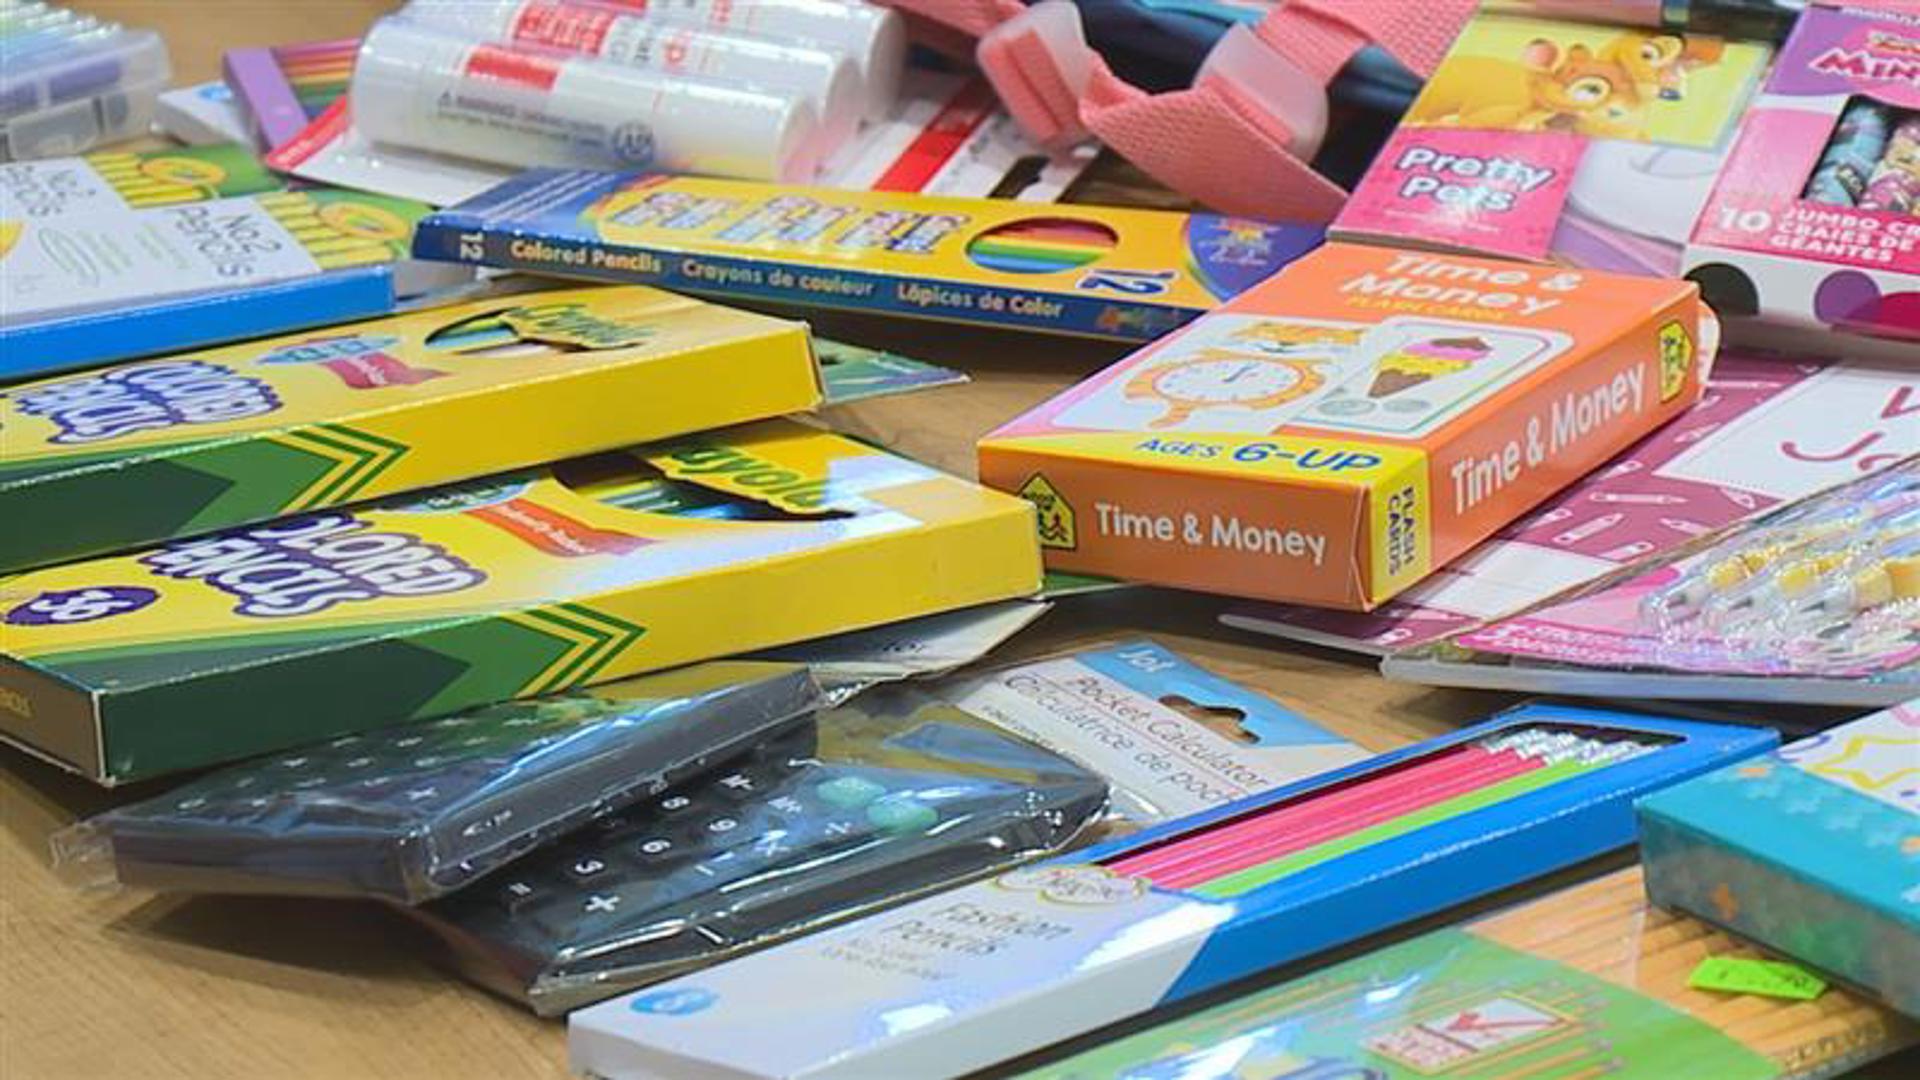 The Salvation Army is aiming to provide more than 375 kids with backpacks and school supplies.